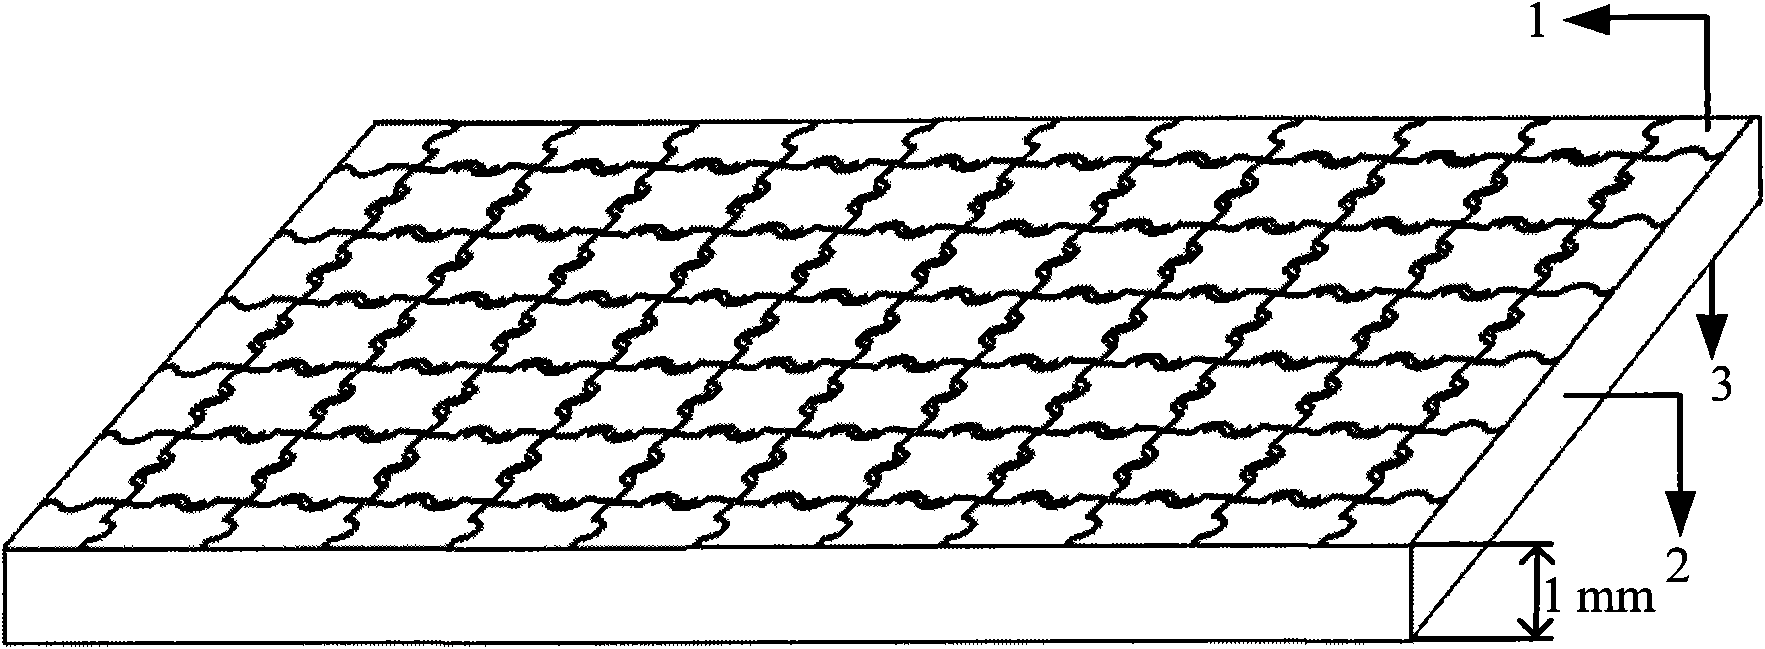 Construction method of compact electromagnetic band gap (EBG) structure for eliminating high speed circuit noise